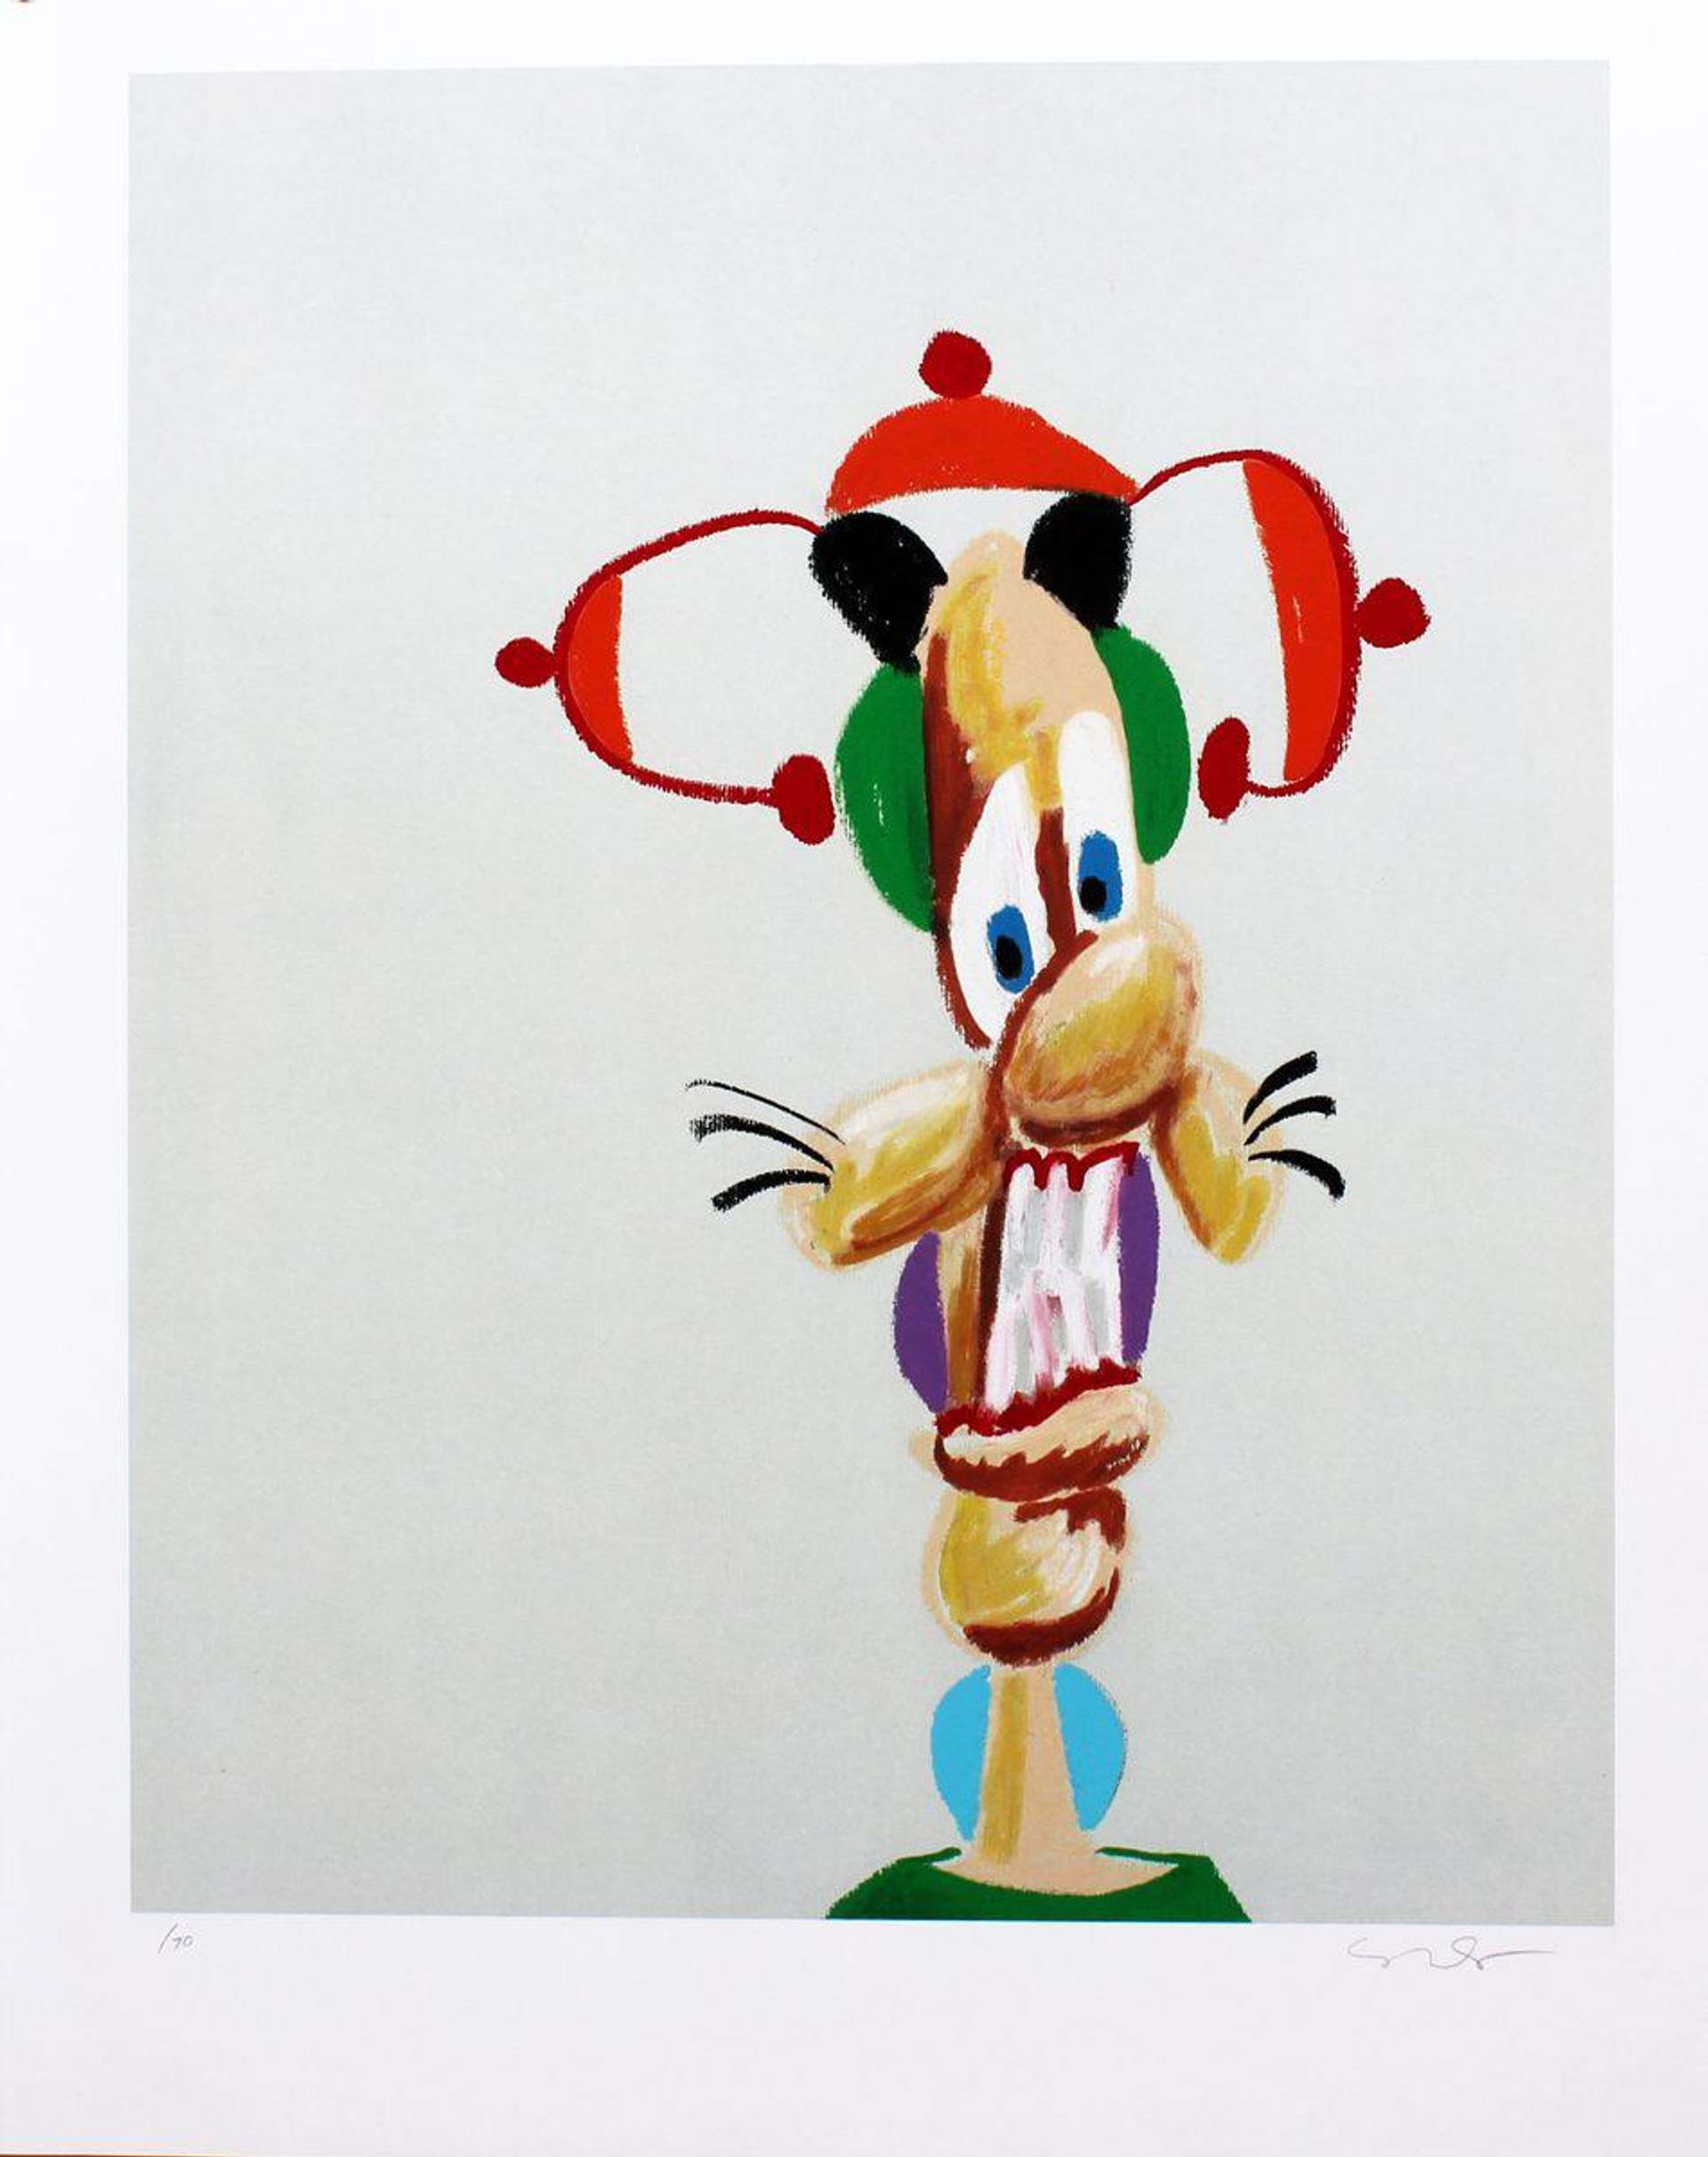 Electric Harlequin - Signed Print by George Condo 2000 - MyArtBroker